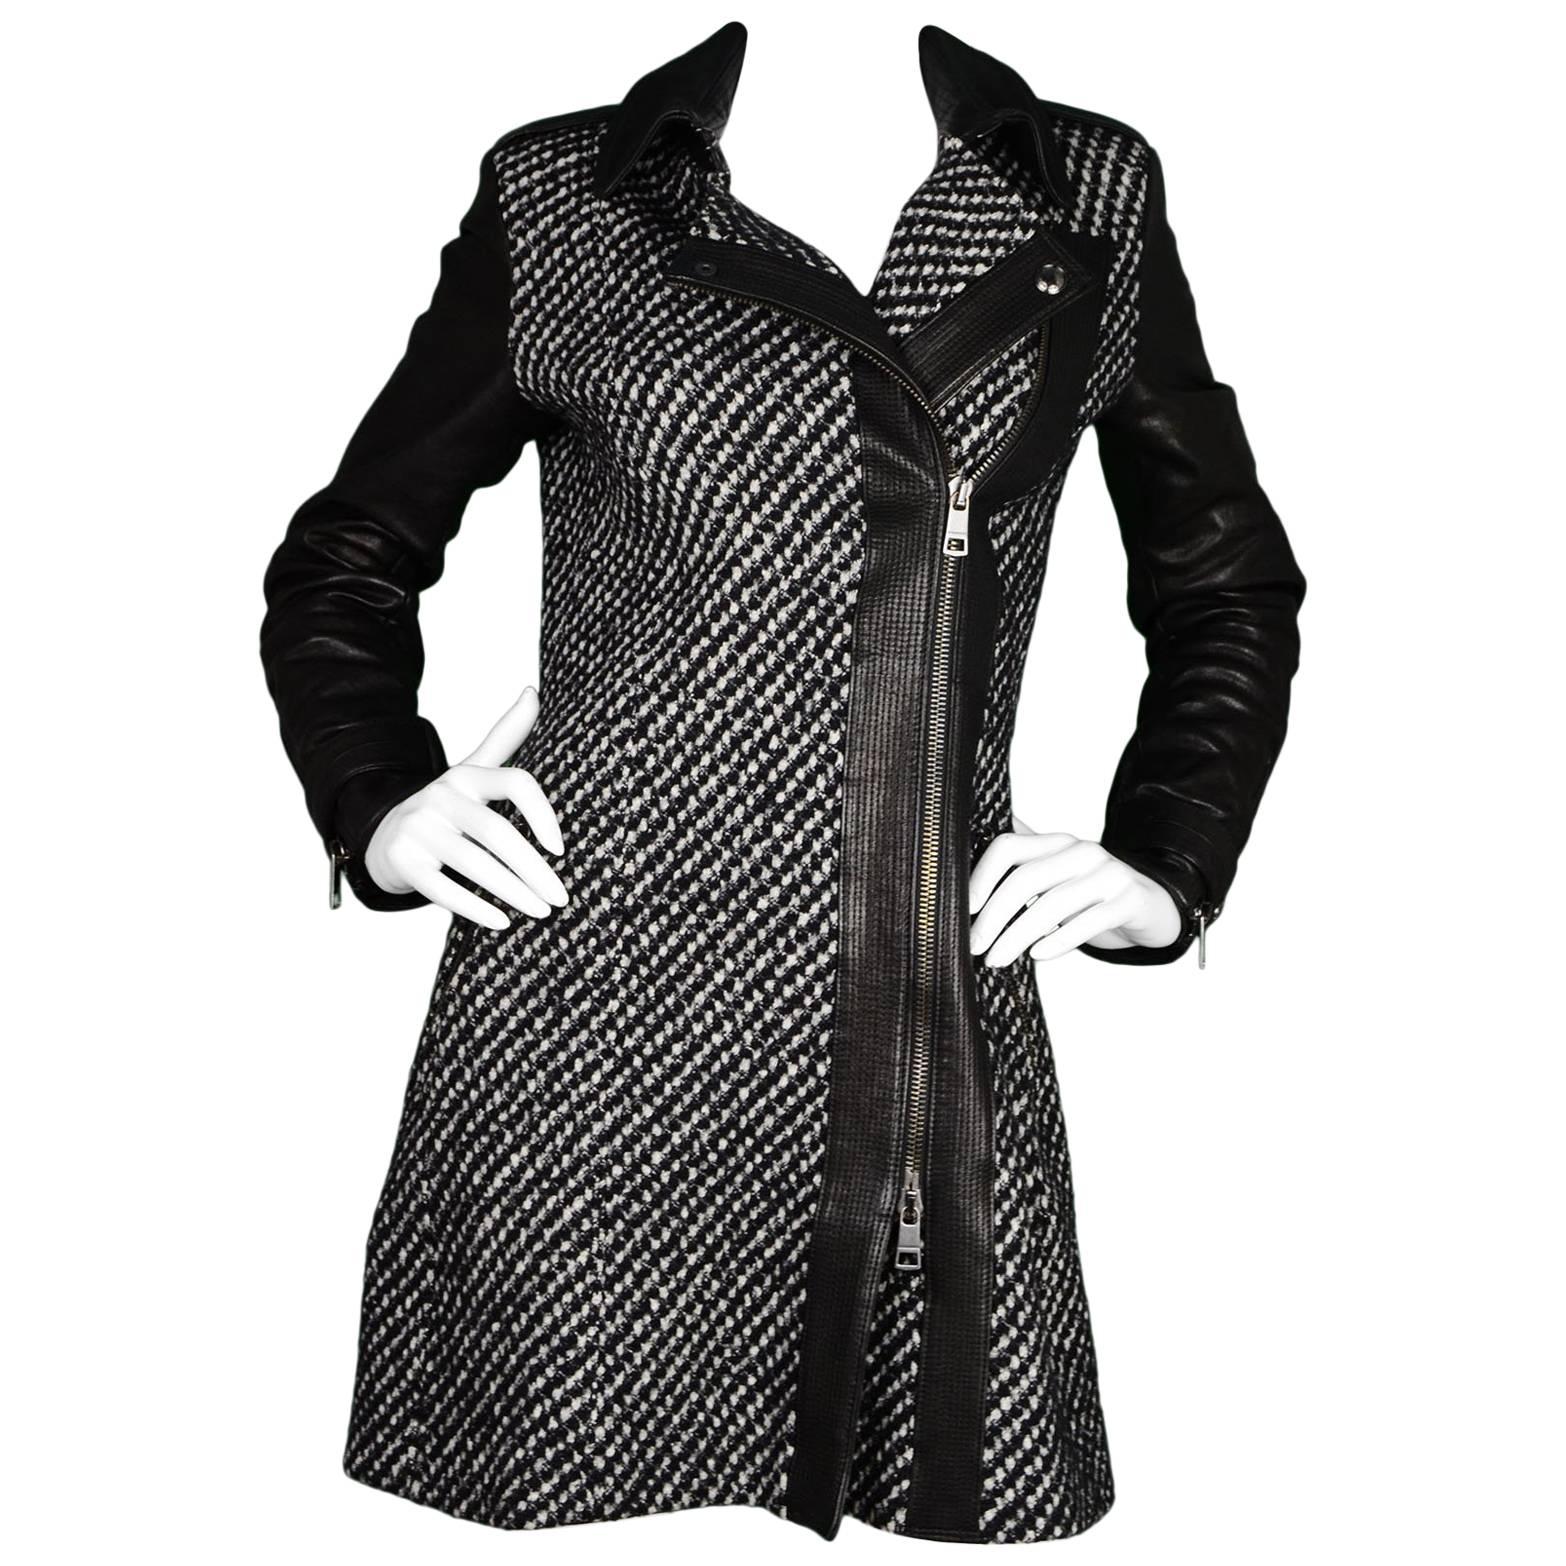 Burberry London Houndstooth & Leather Long Coat sz US4